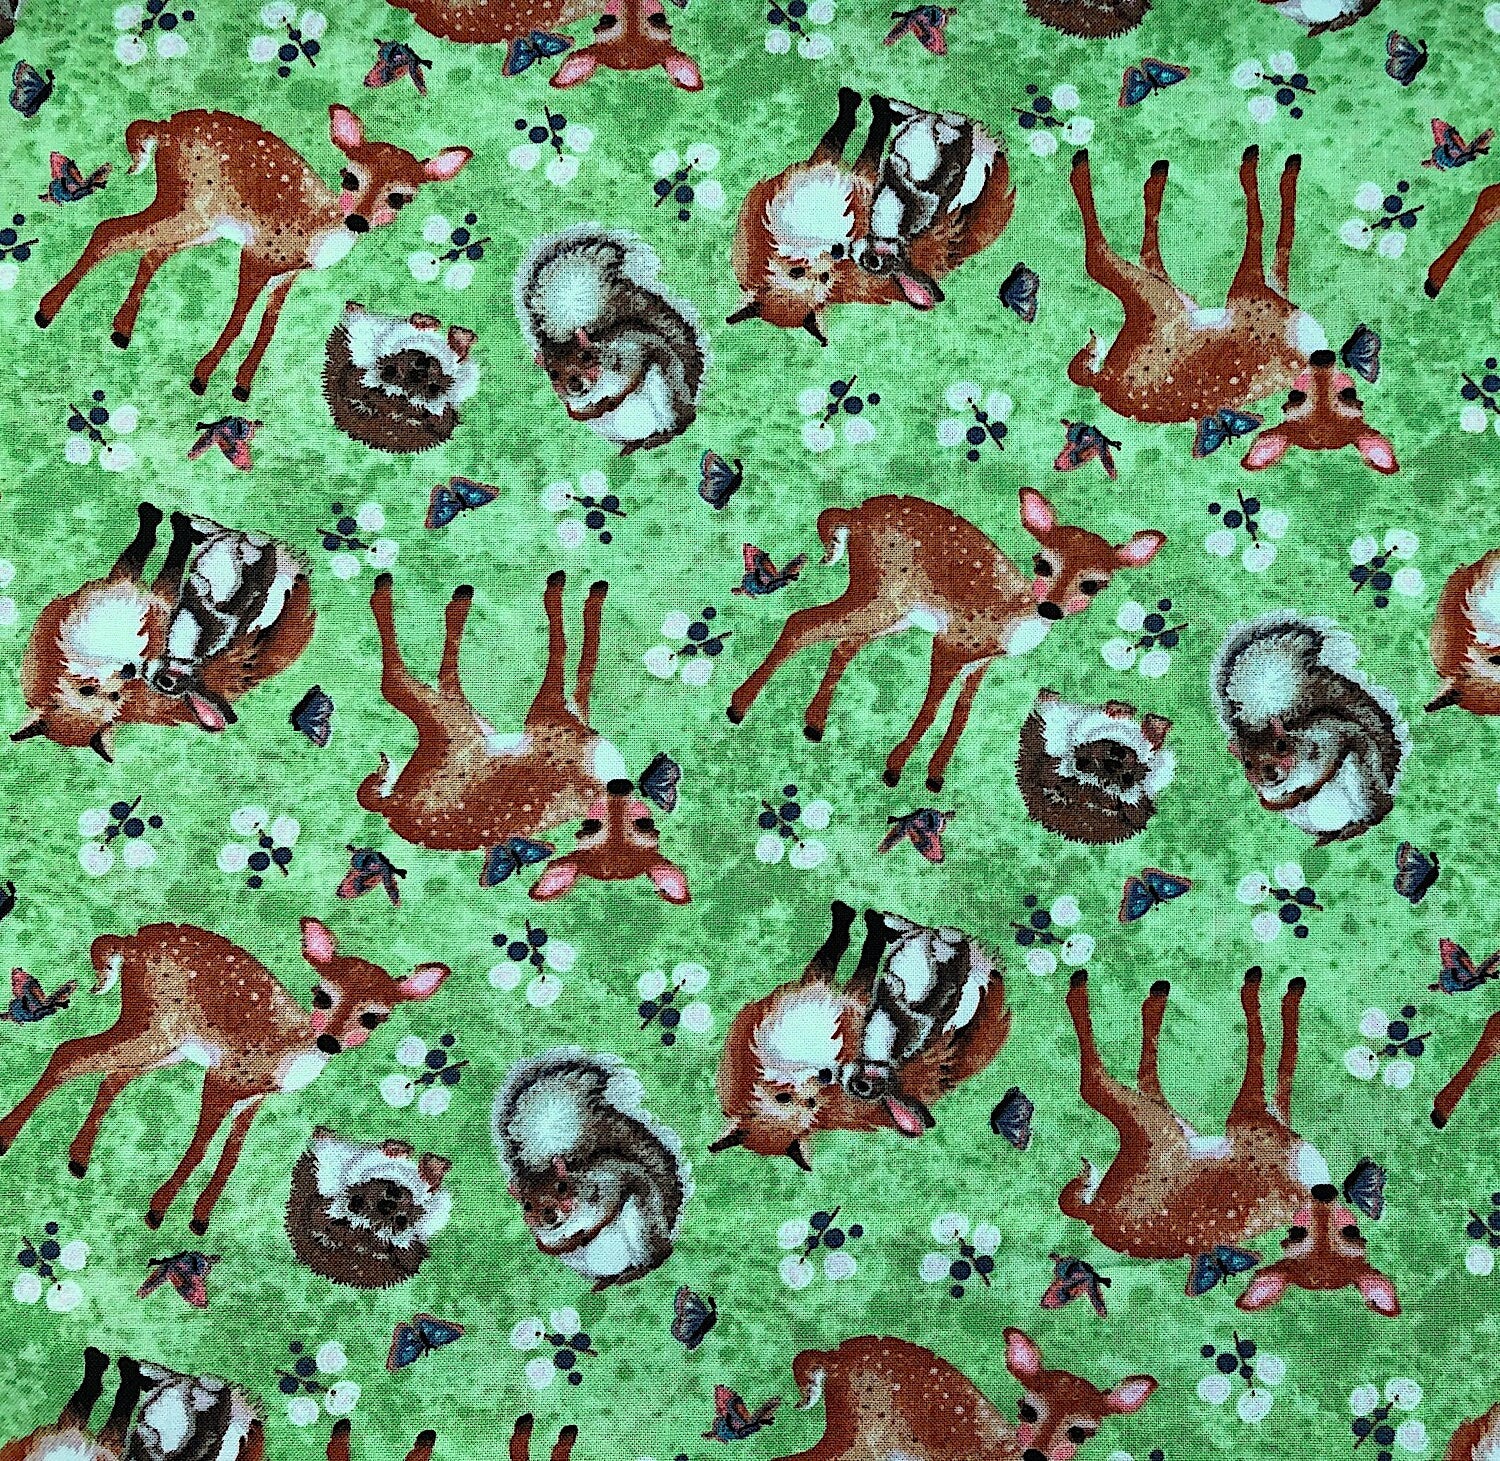 This green fabric is covered with young forest animals. There are deer, fox, and other young animals.